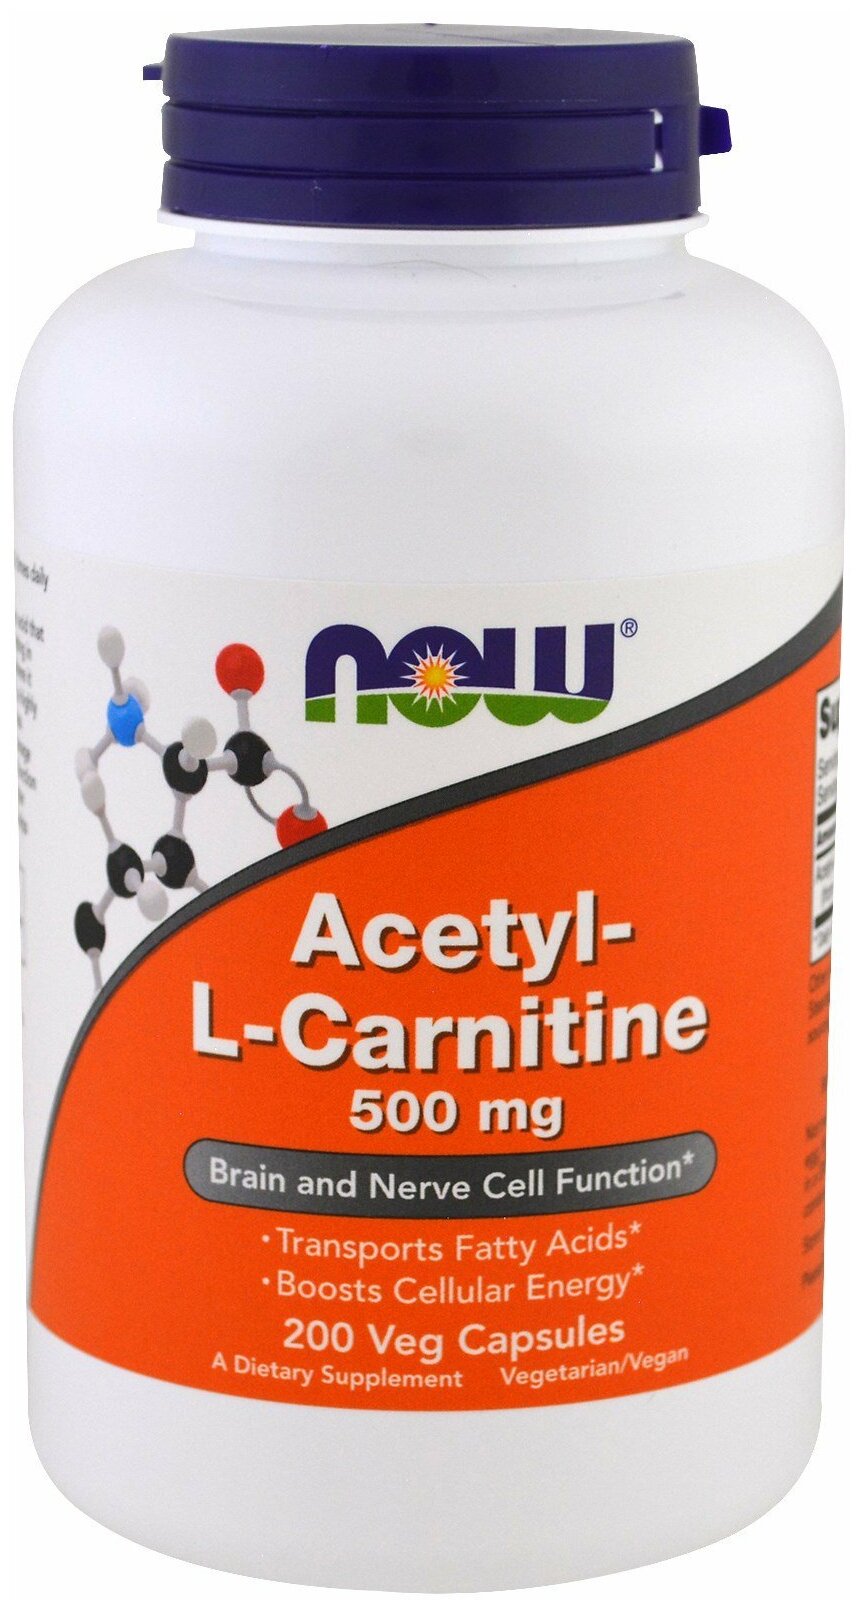 Acetyl-L-Carnitine NOW, Ацетил-L-Карнитин 500 мг - 200 вегетарианских капсул